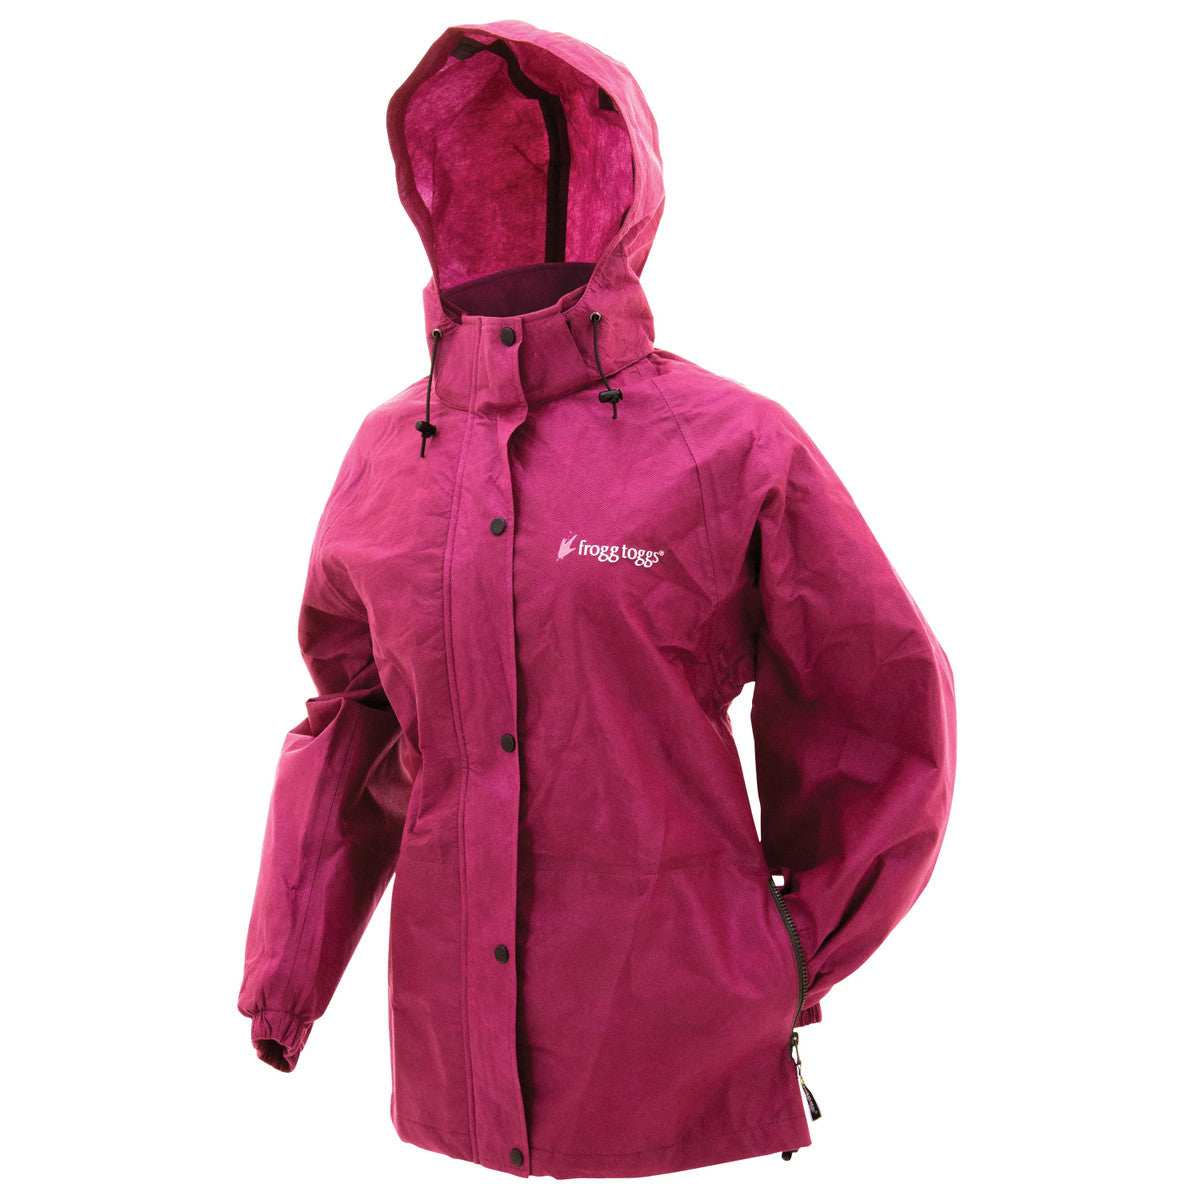 Frogg Togg Women's Pro Action Jacket - KBM Outdoors